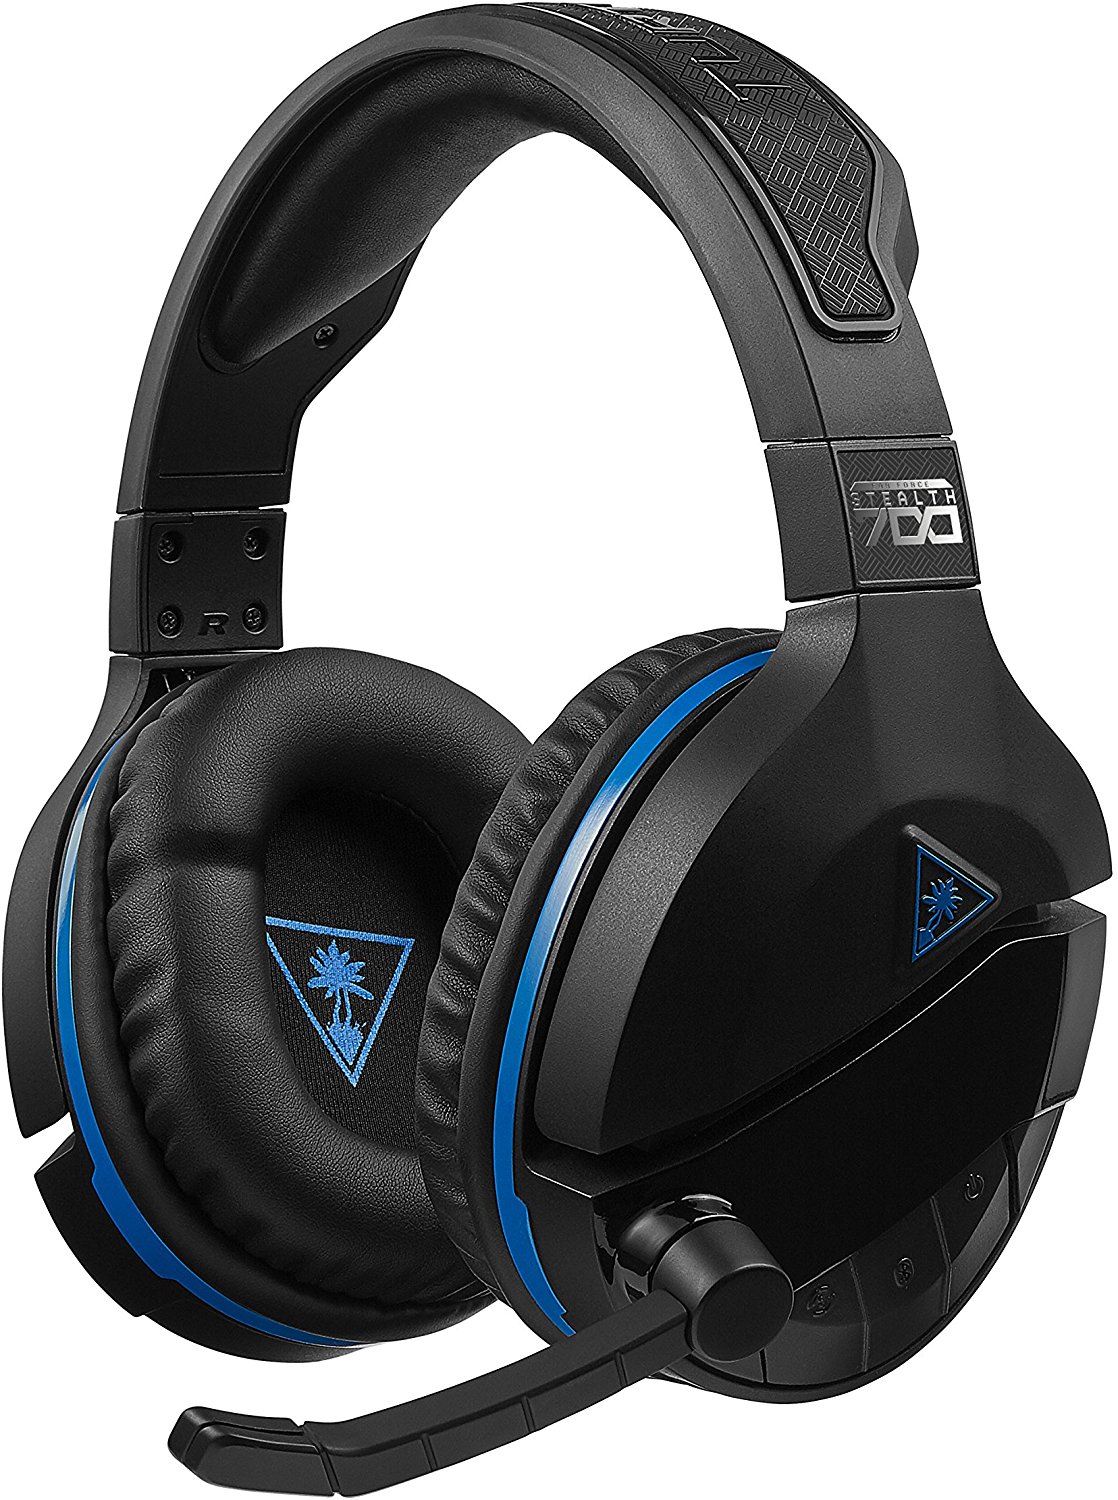 Turtle Beach Stealth 700 Premium Wireless Surround Sound Gaming Headset for PlayStation 4 Pro and PlayStation 4